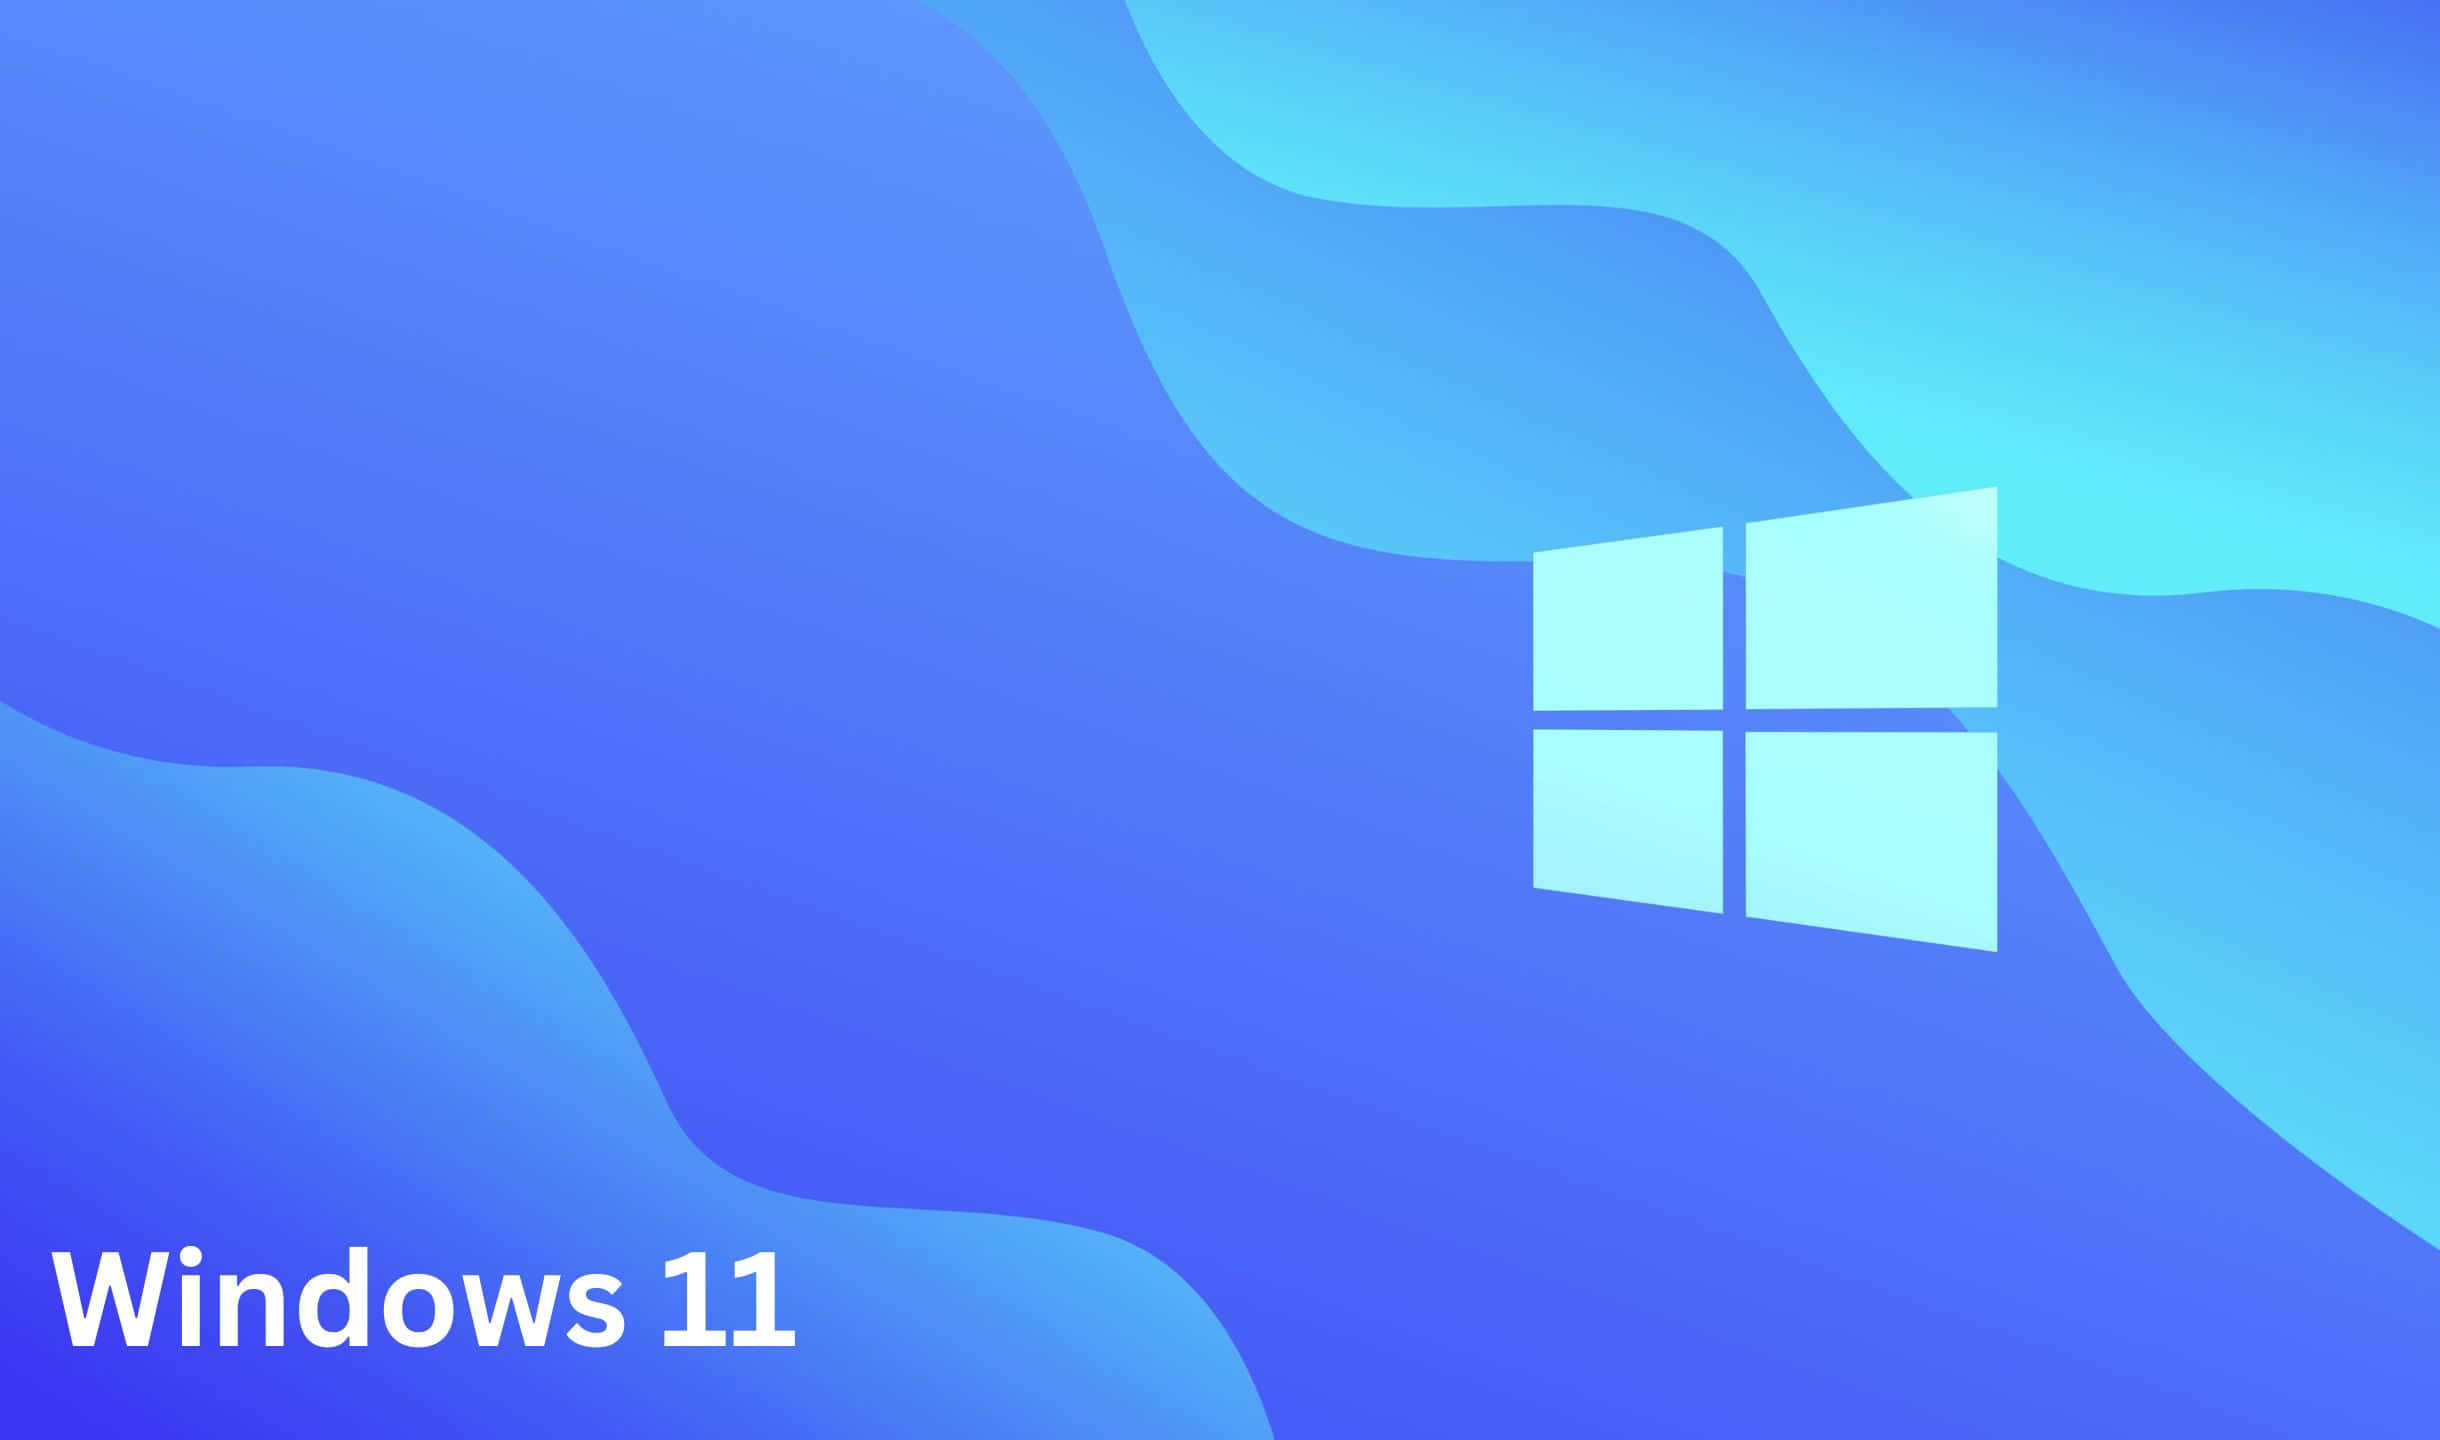 Get Ready For Windows 11 - The Newest Operating System